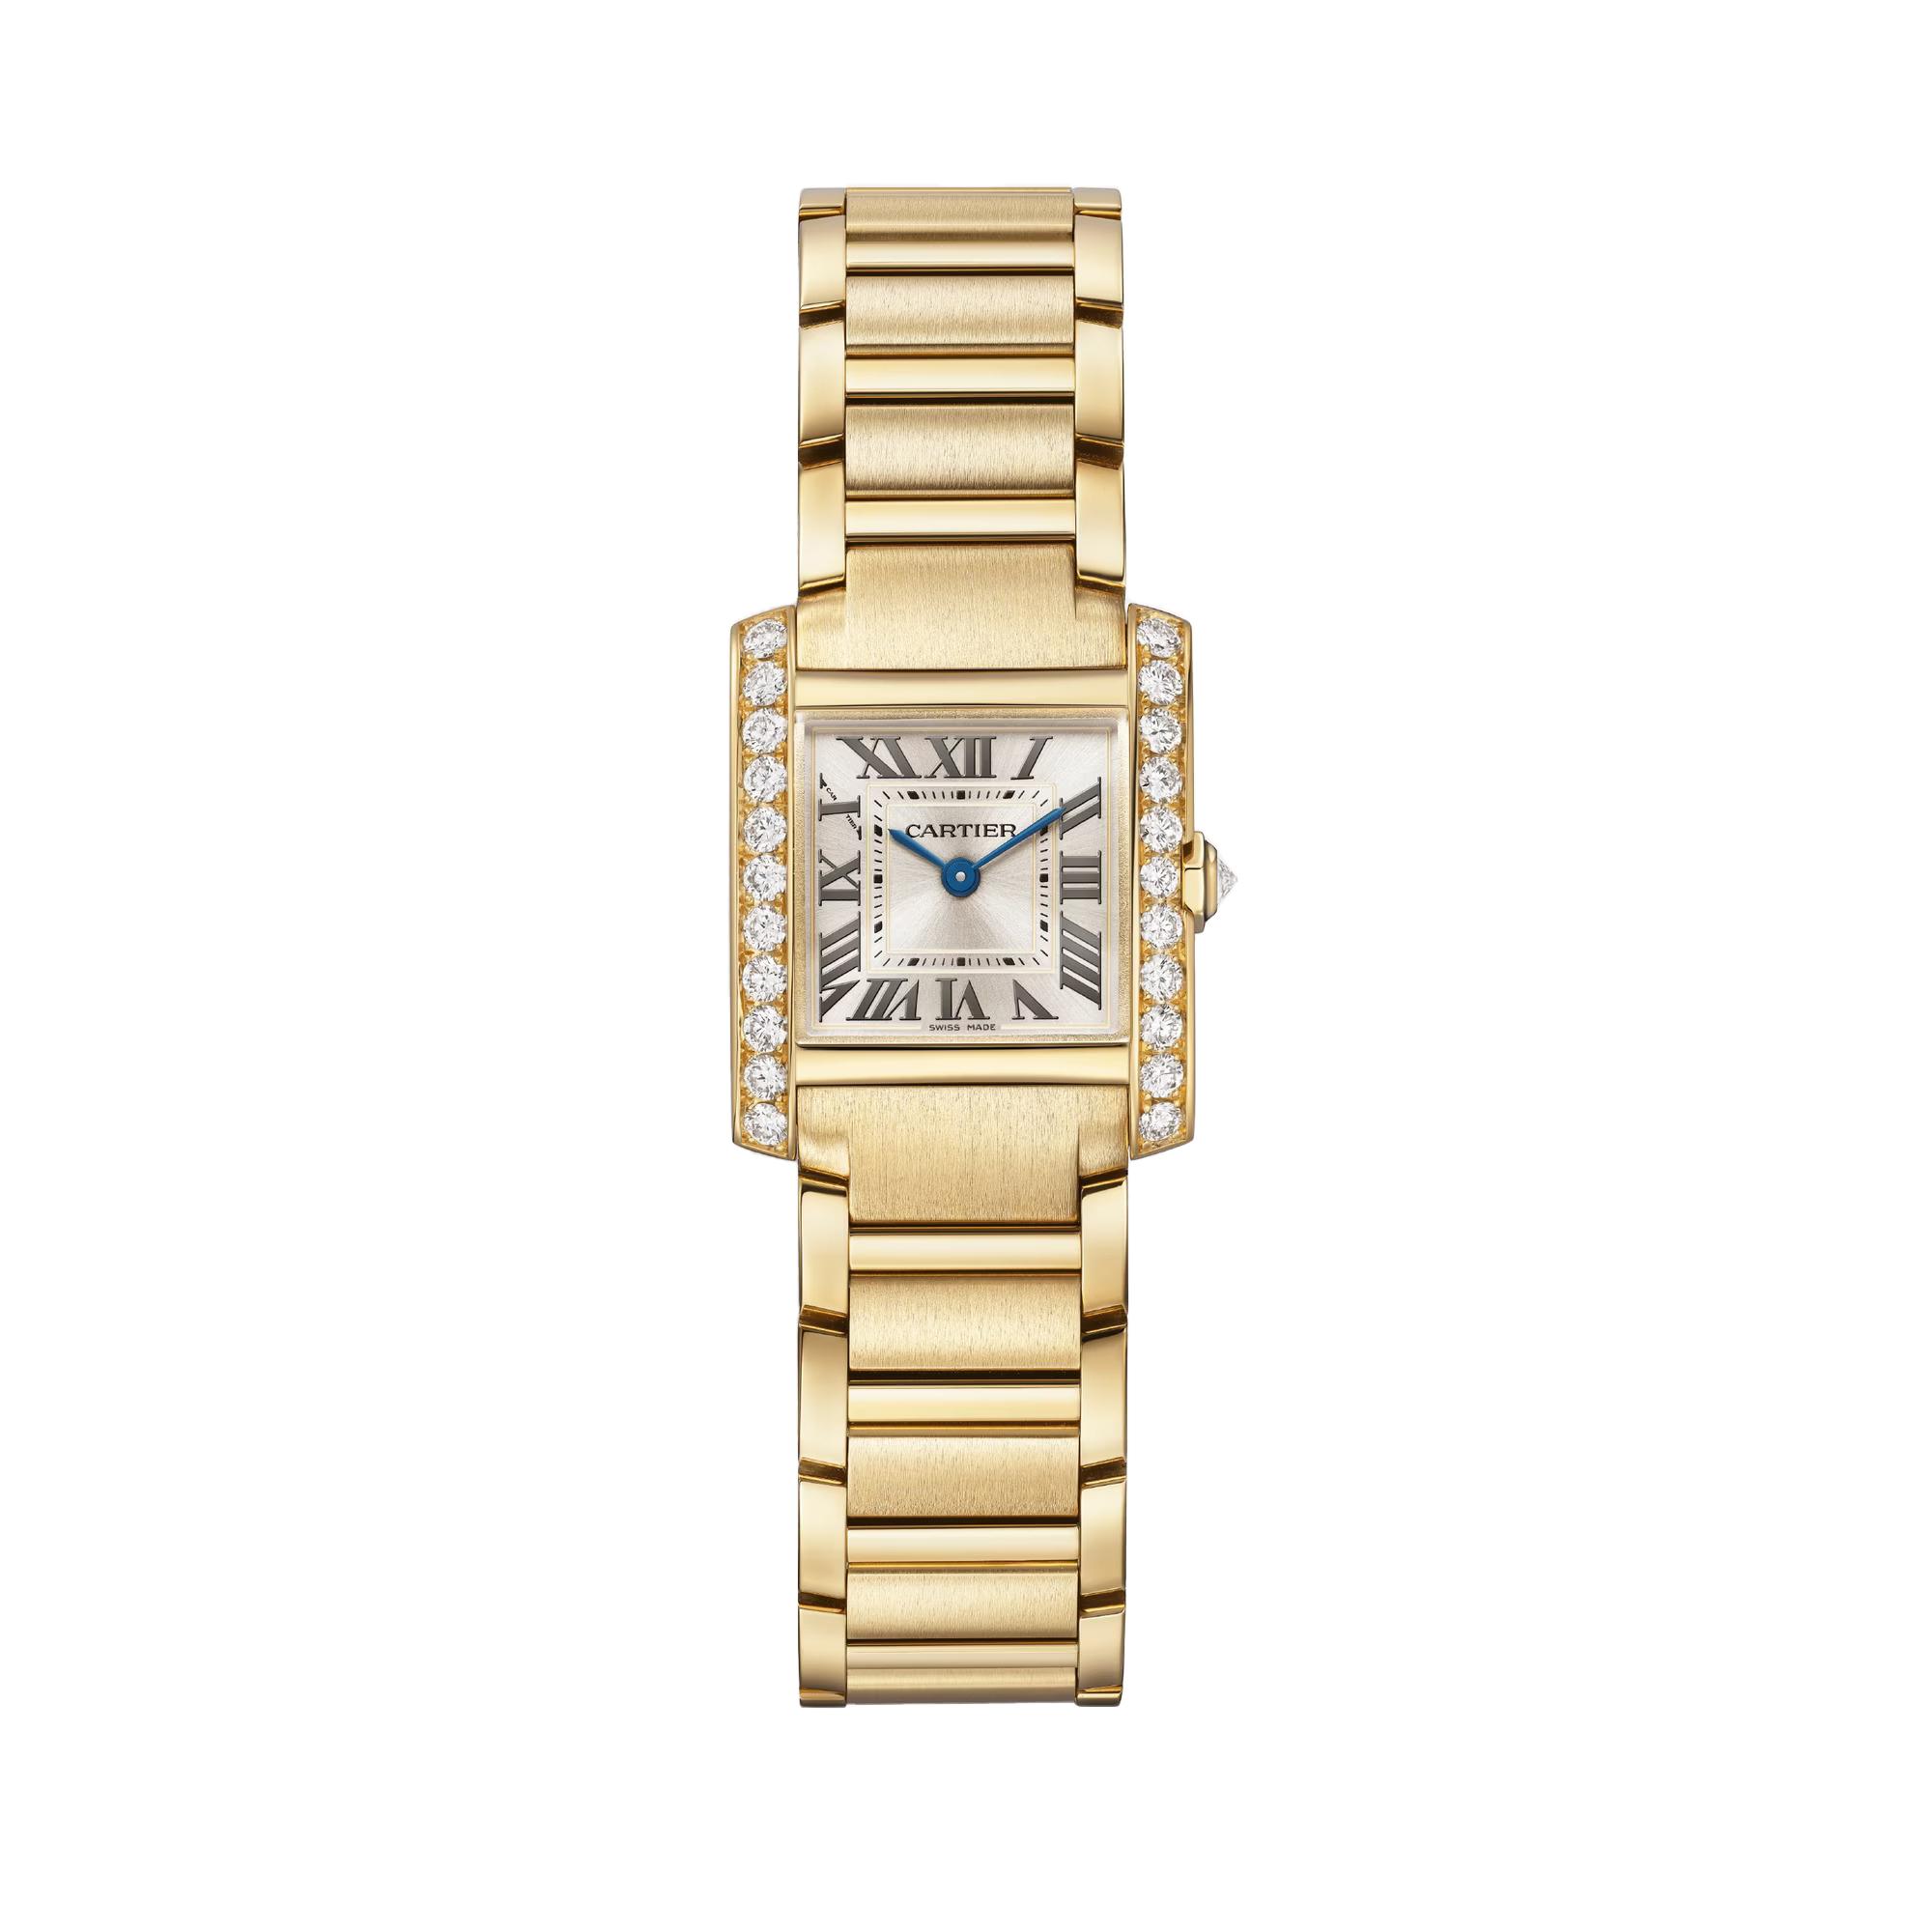 Cartier Tank Francaise Watch in Yellow Gold with Diamonds, size small